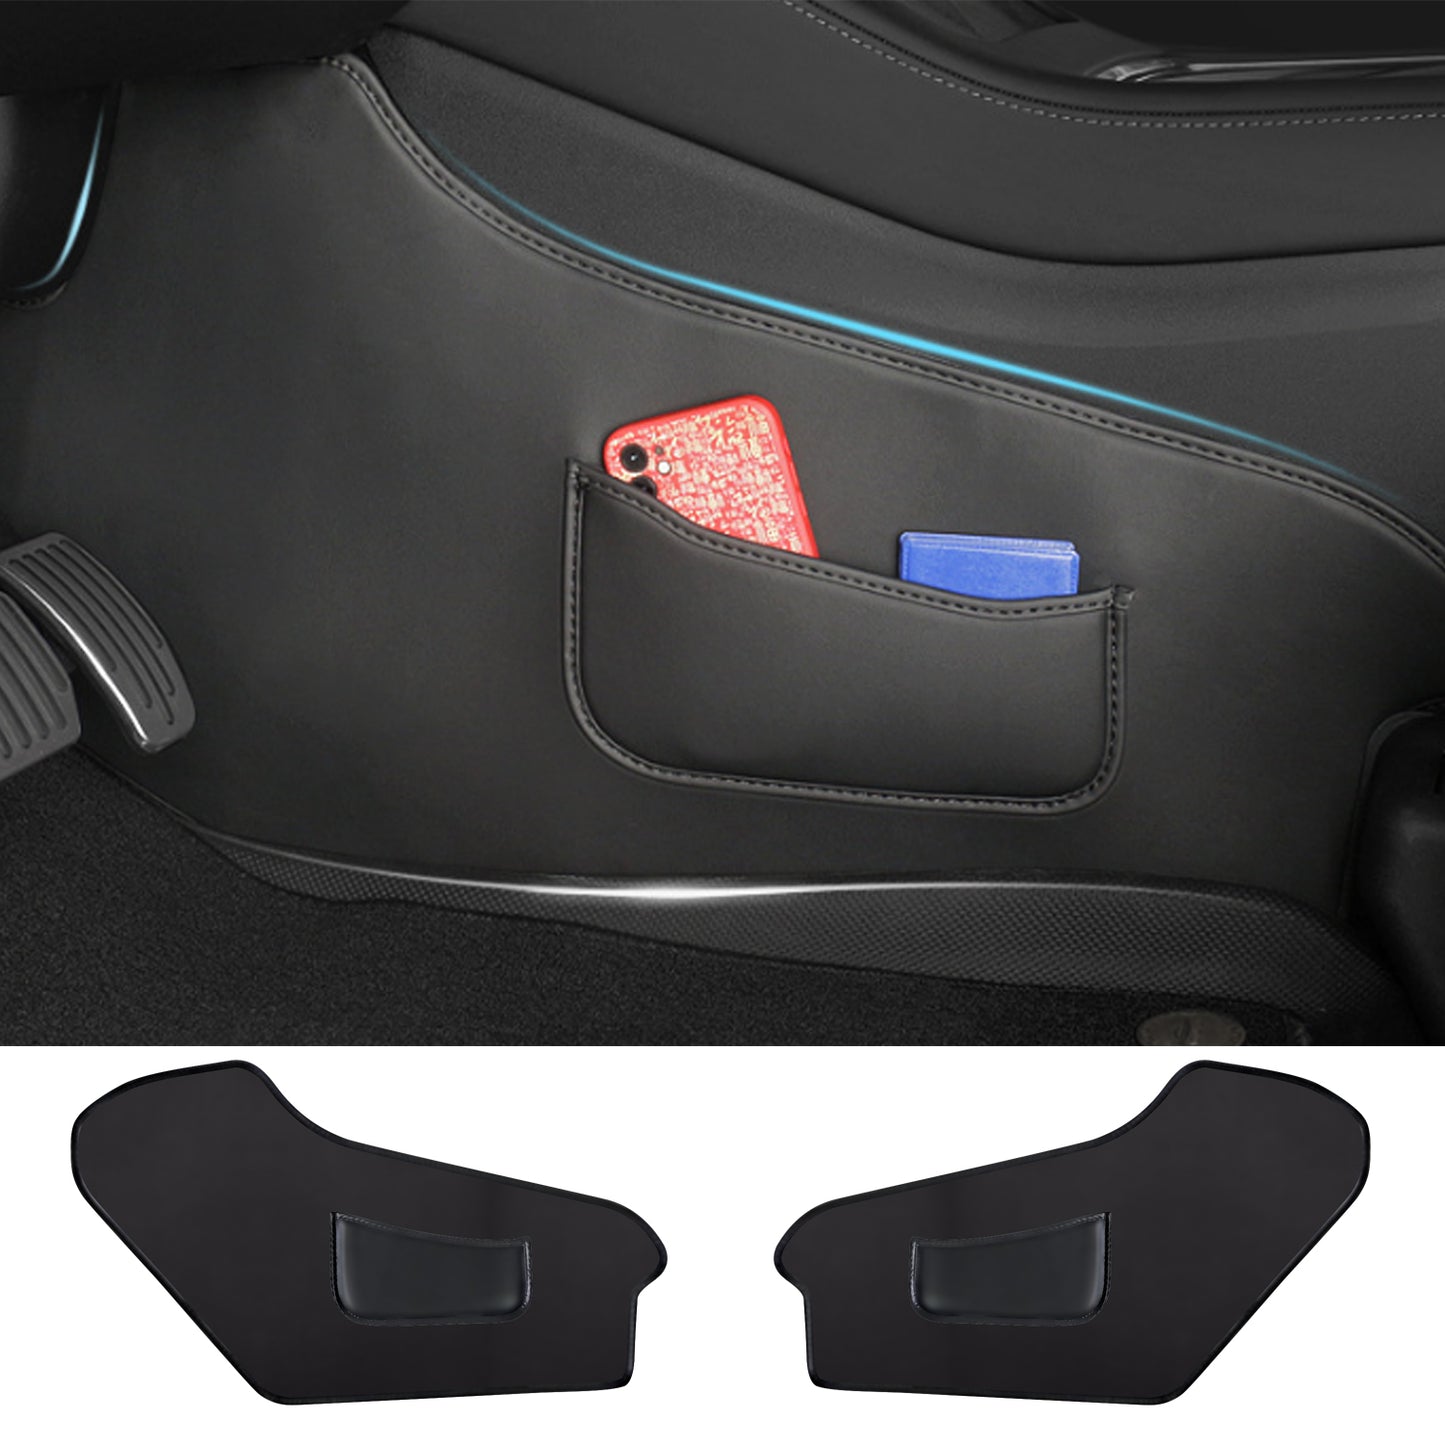 Seat Side Pads Anti Kick Center Console Guard Mat for Model 3 Highland/3/Y